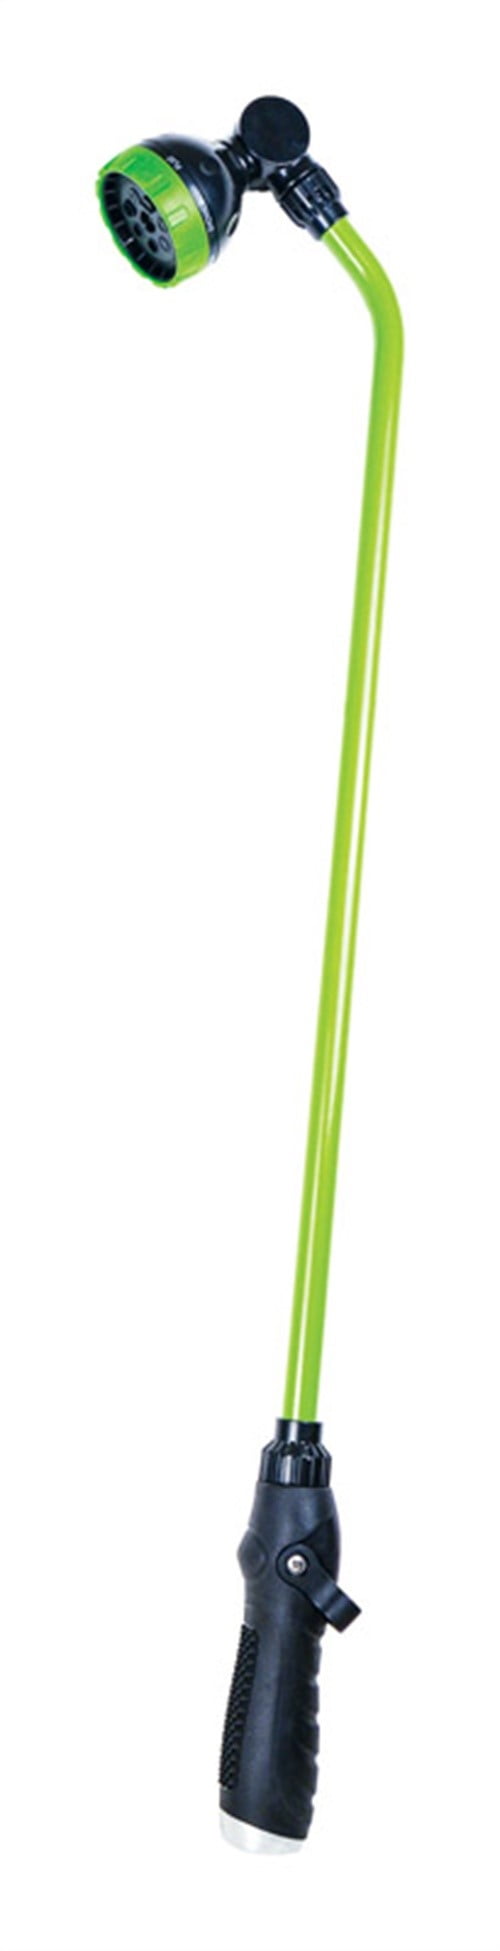 Picture of Rugg 7690787 Lime Green 7 pattern Shower Metal Watering Wand